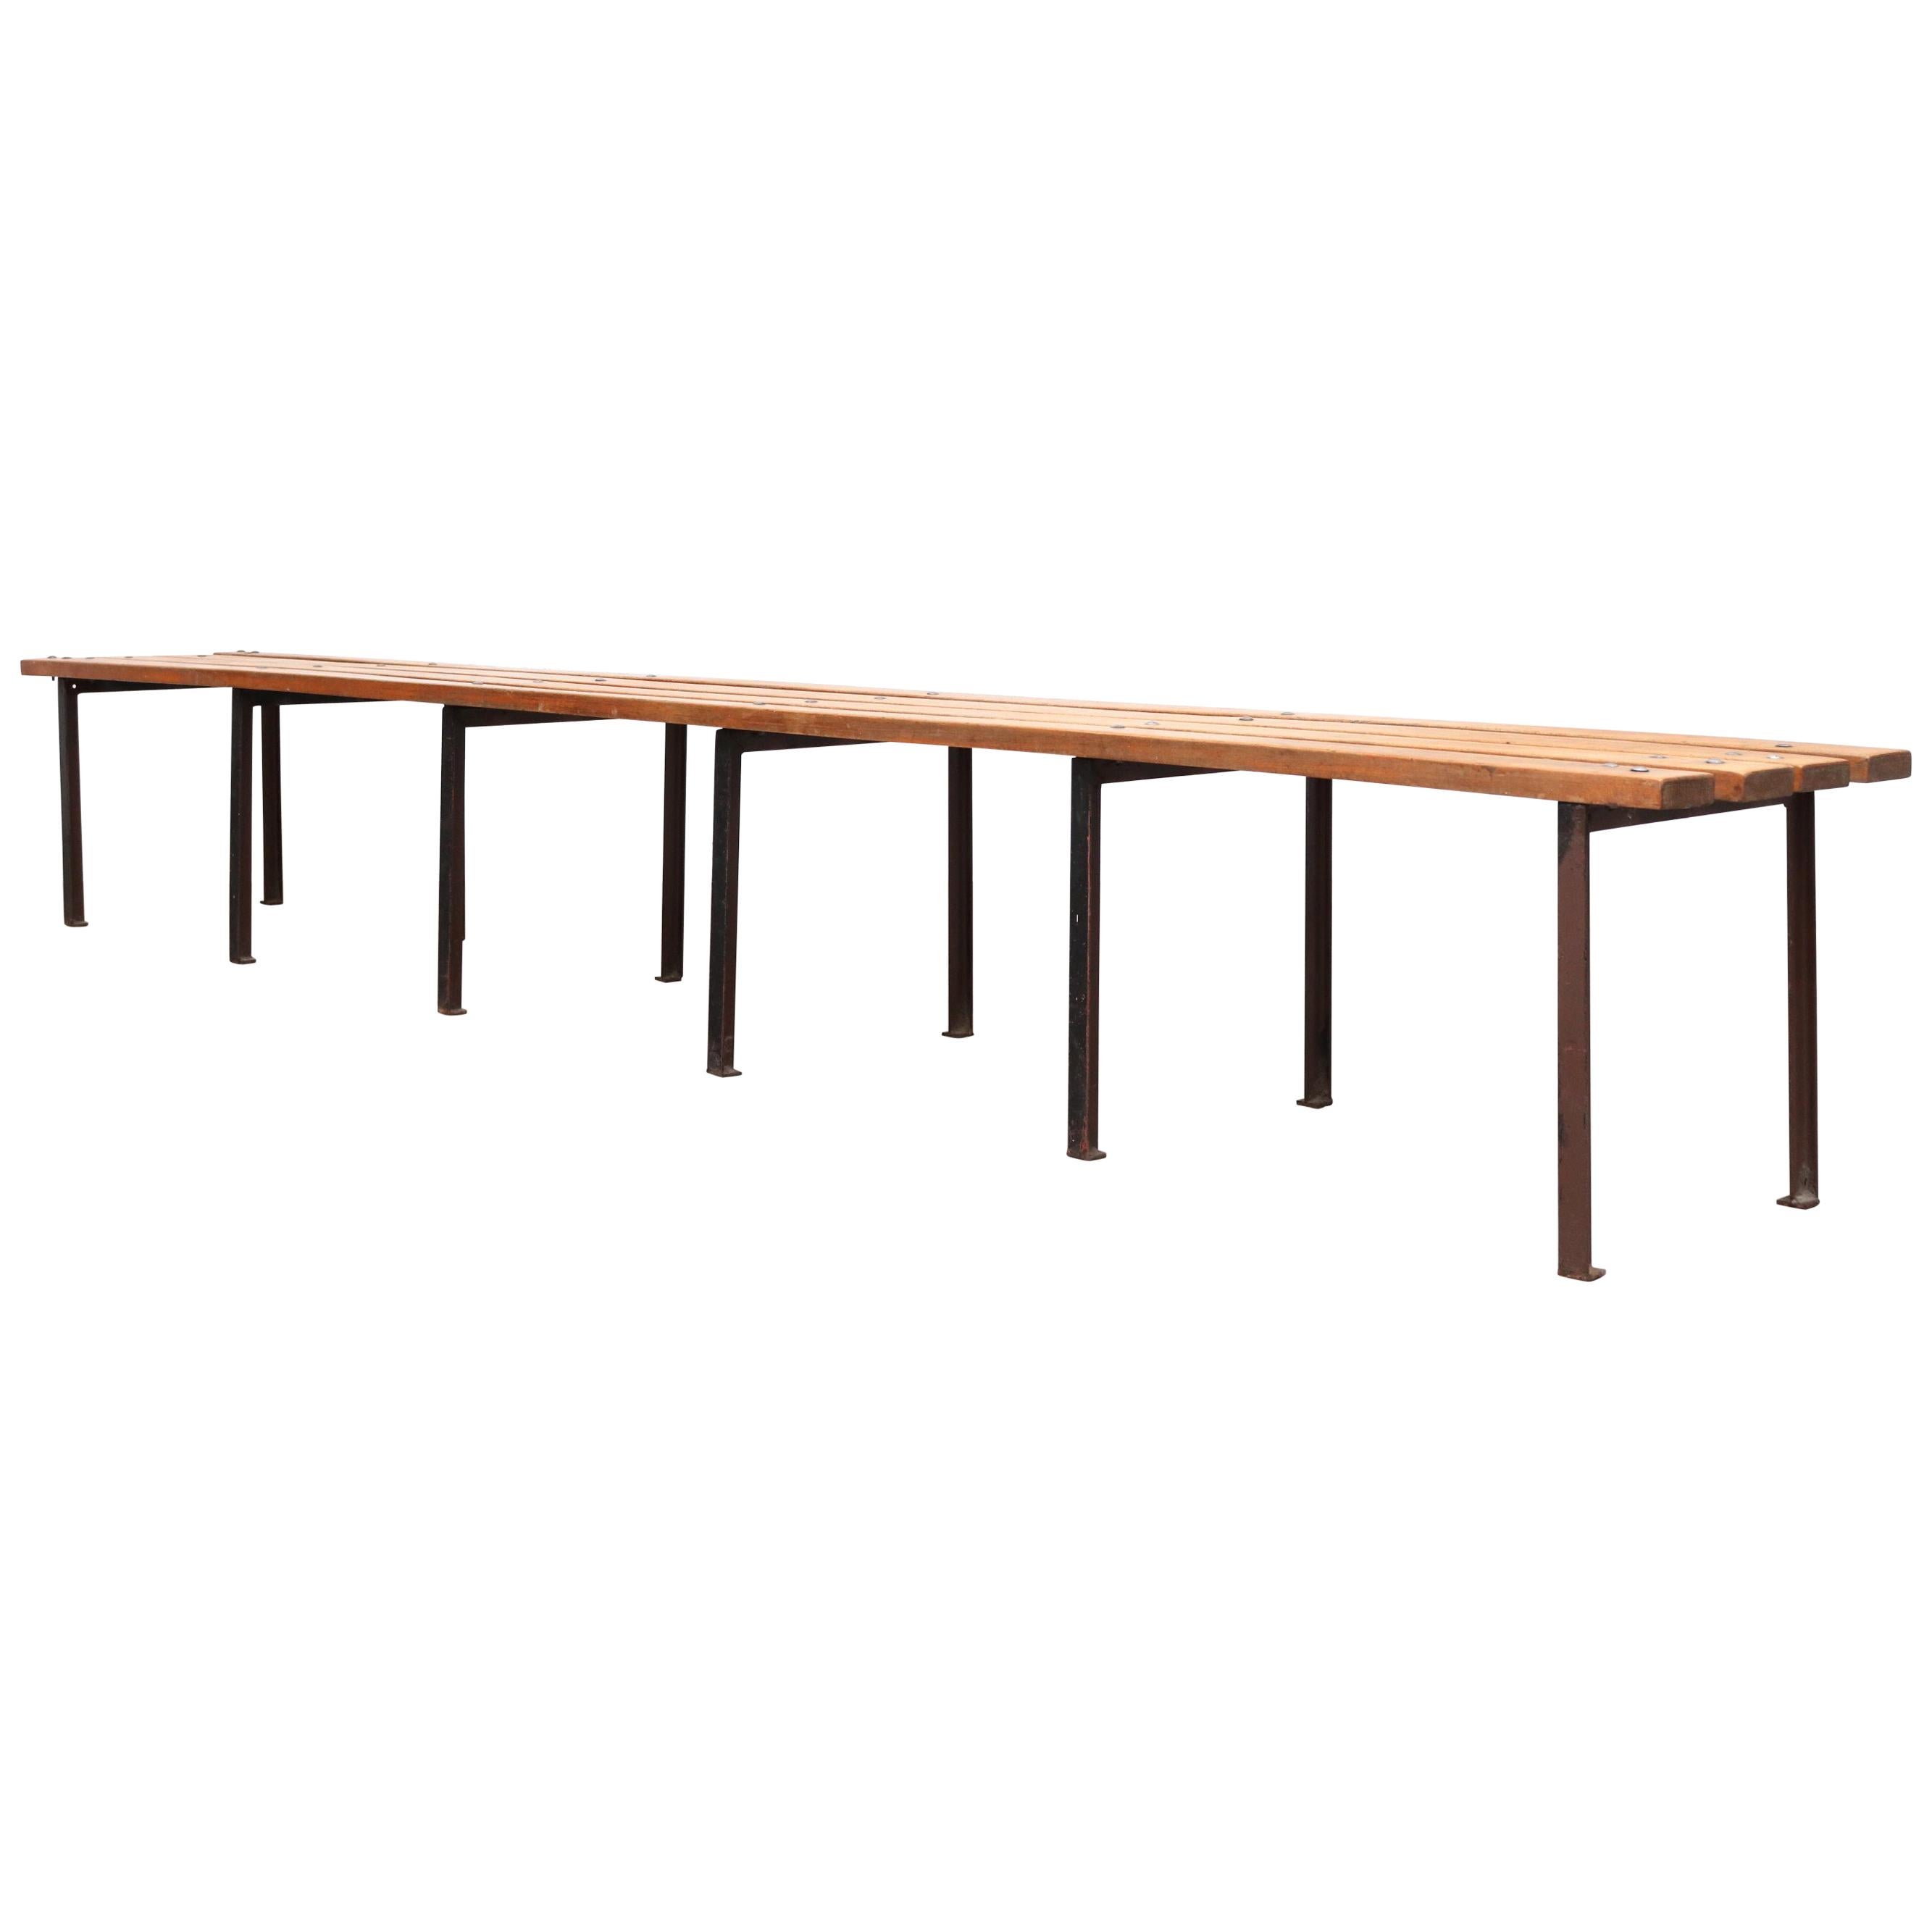 Extra Long Slat Wooden Bench with Enameled Metal Legs